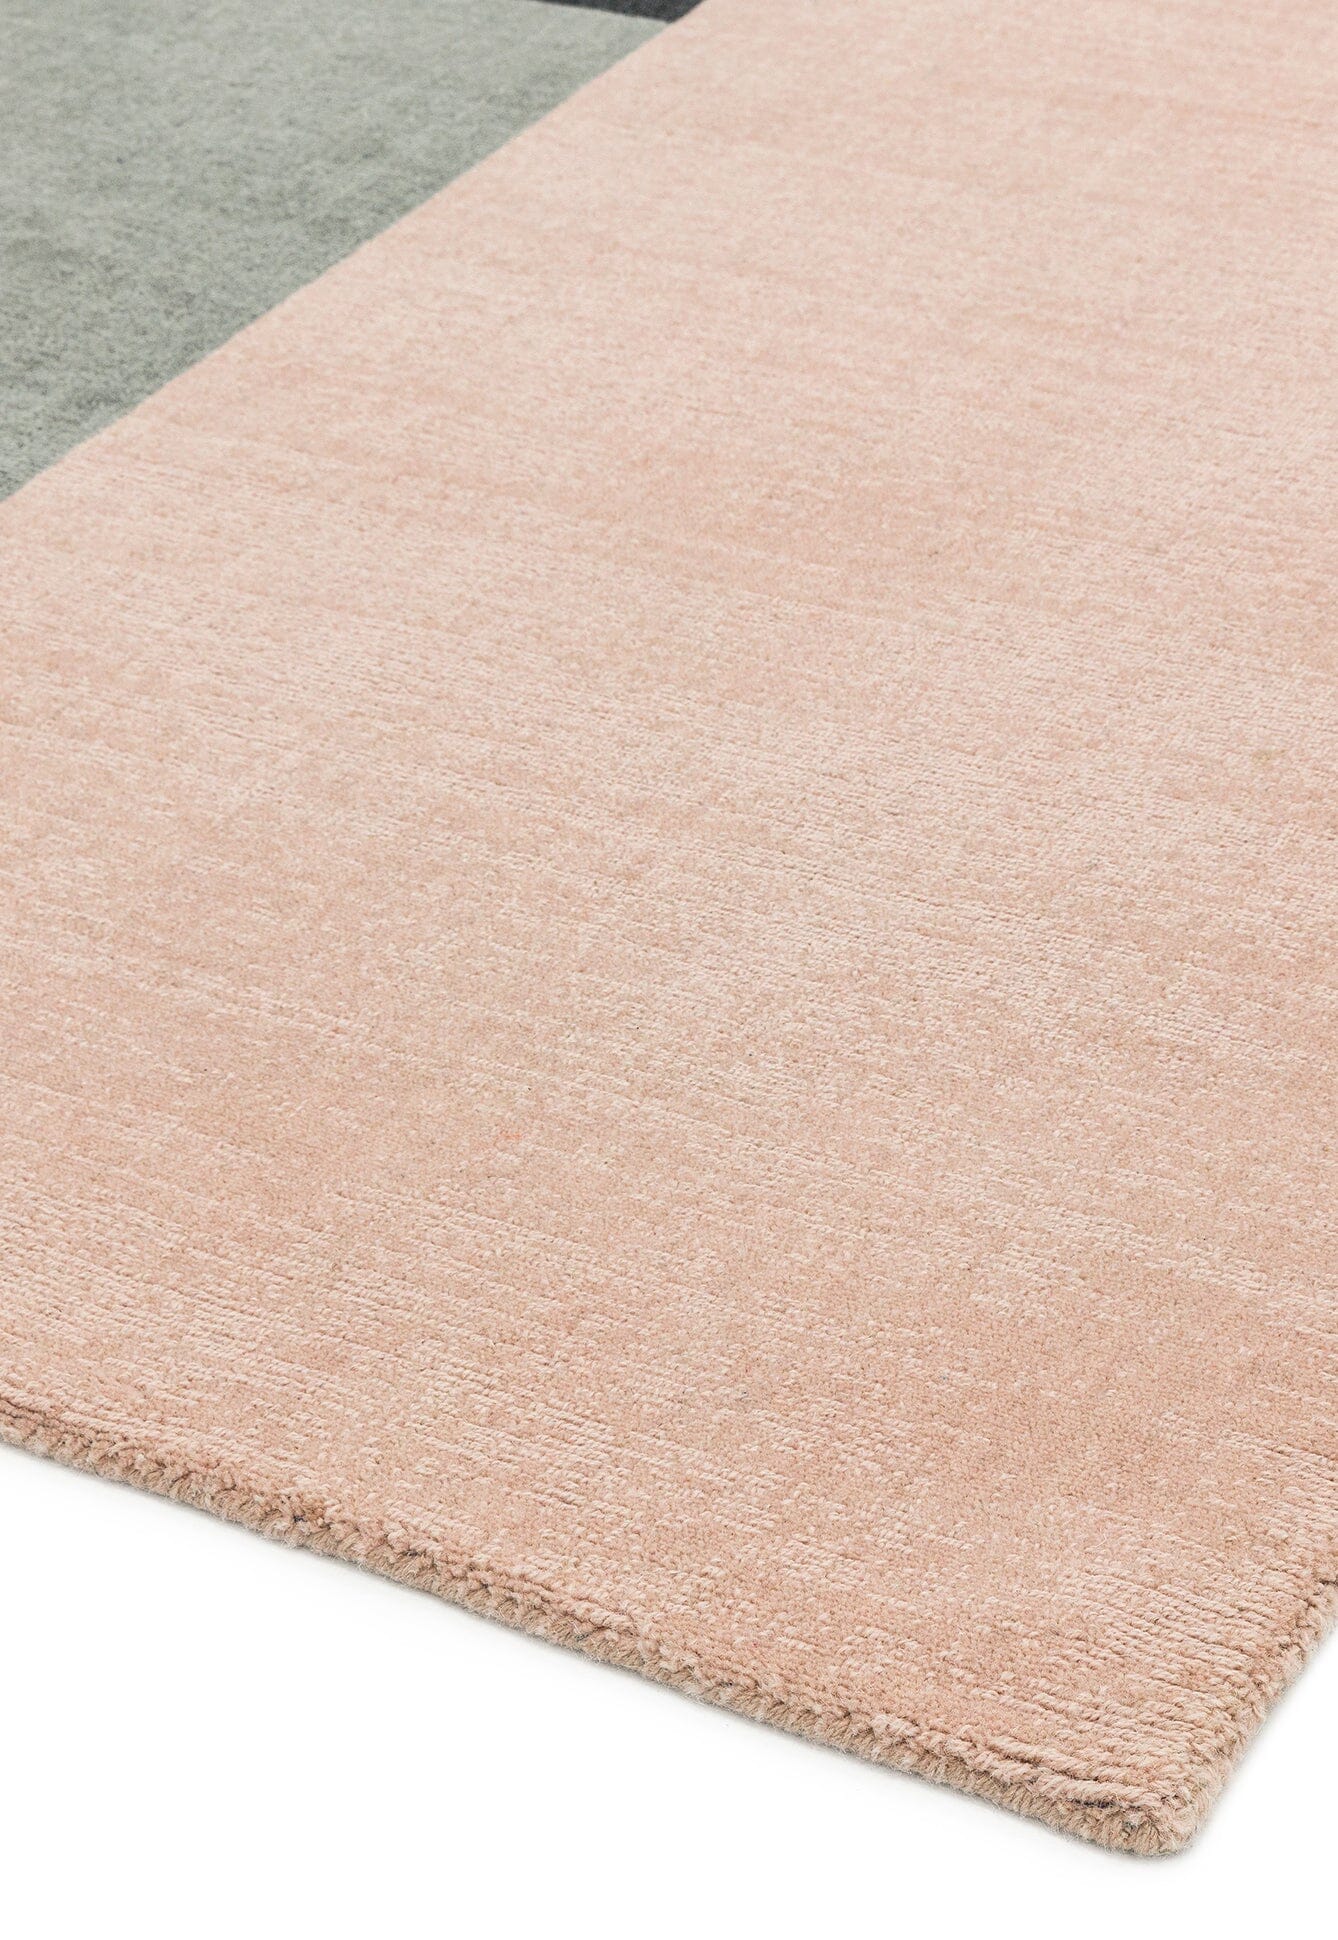 Asiatic Carpets Blox Hand Woven Rug Pink - 200 x 300cm